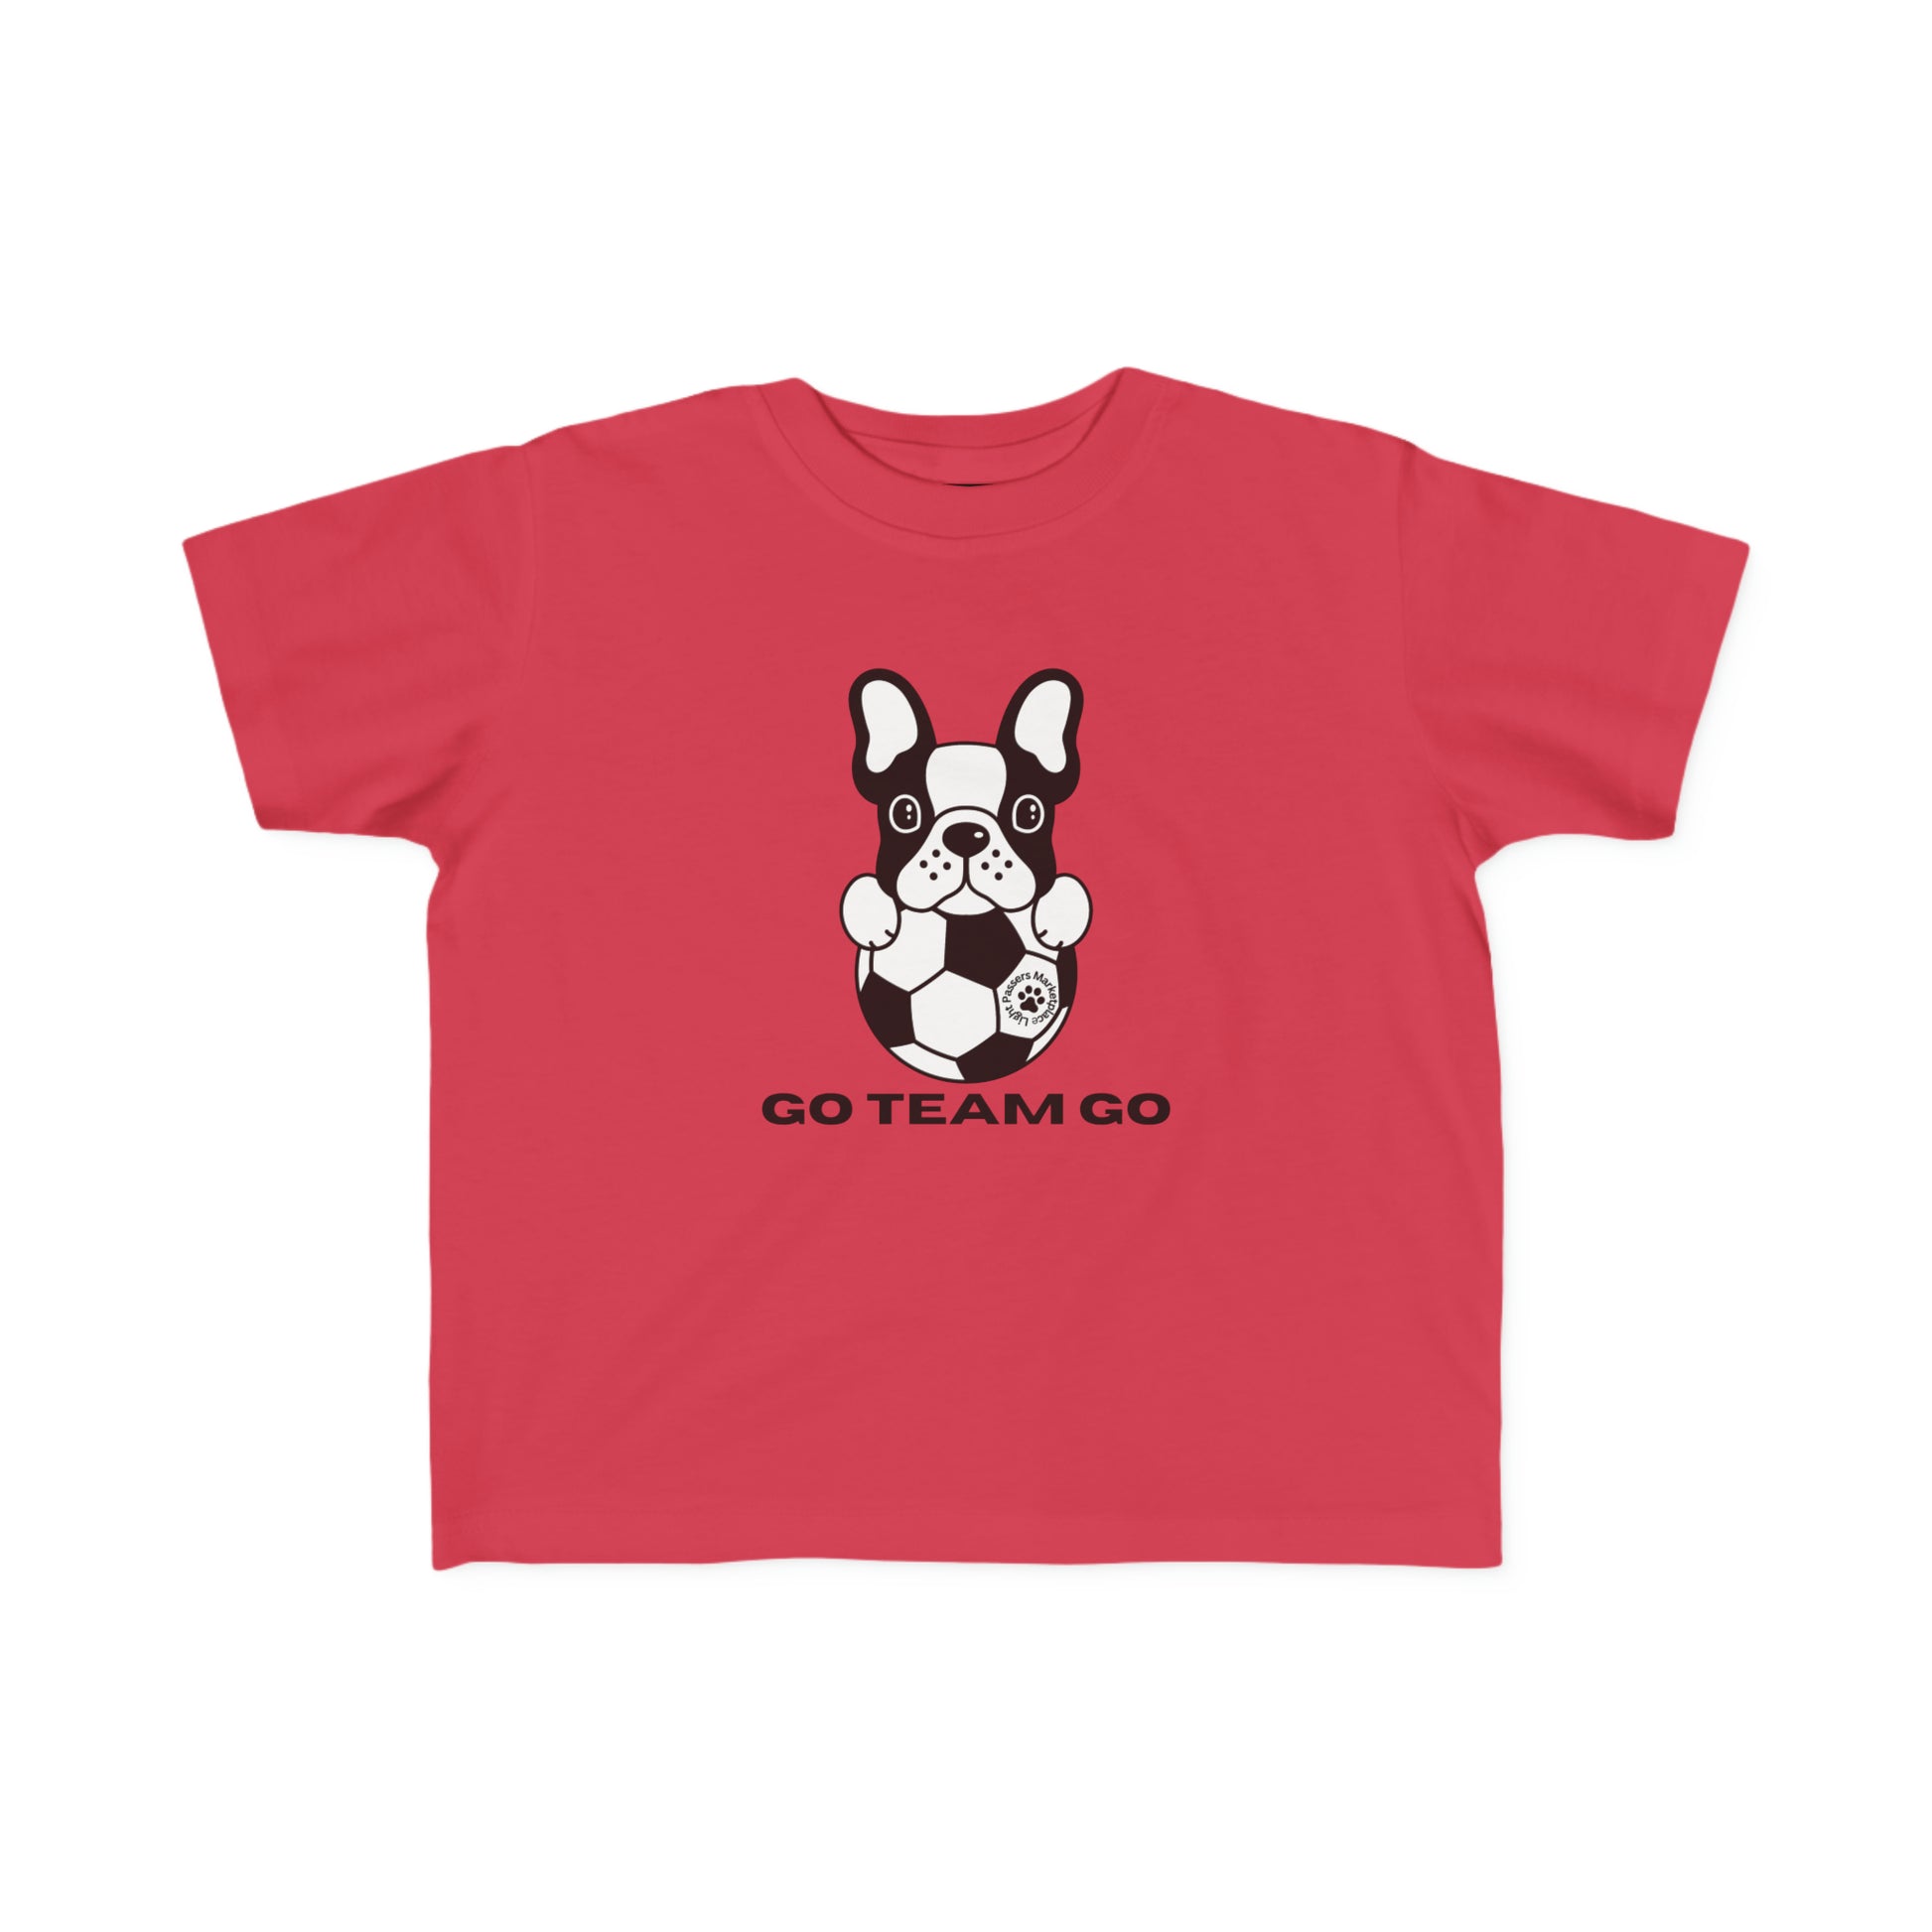 A toddler's Soccer Dog Go Team Go T-shirt featuring a dog with a football. Soft, 100% cotton, durable print, perfect for first adventures. Classic fit, tear-away label, true to size.